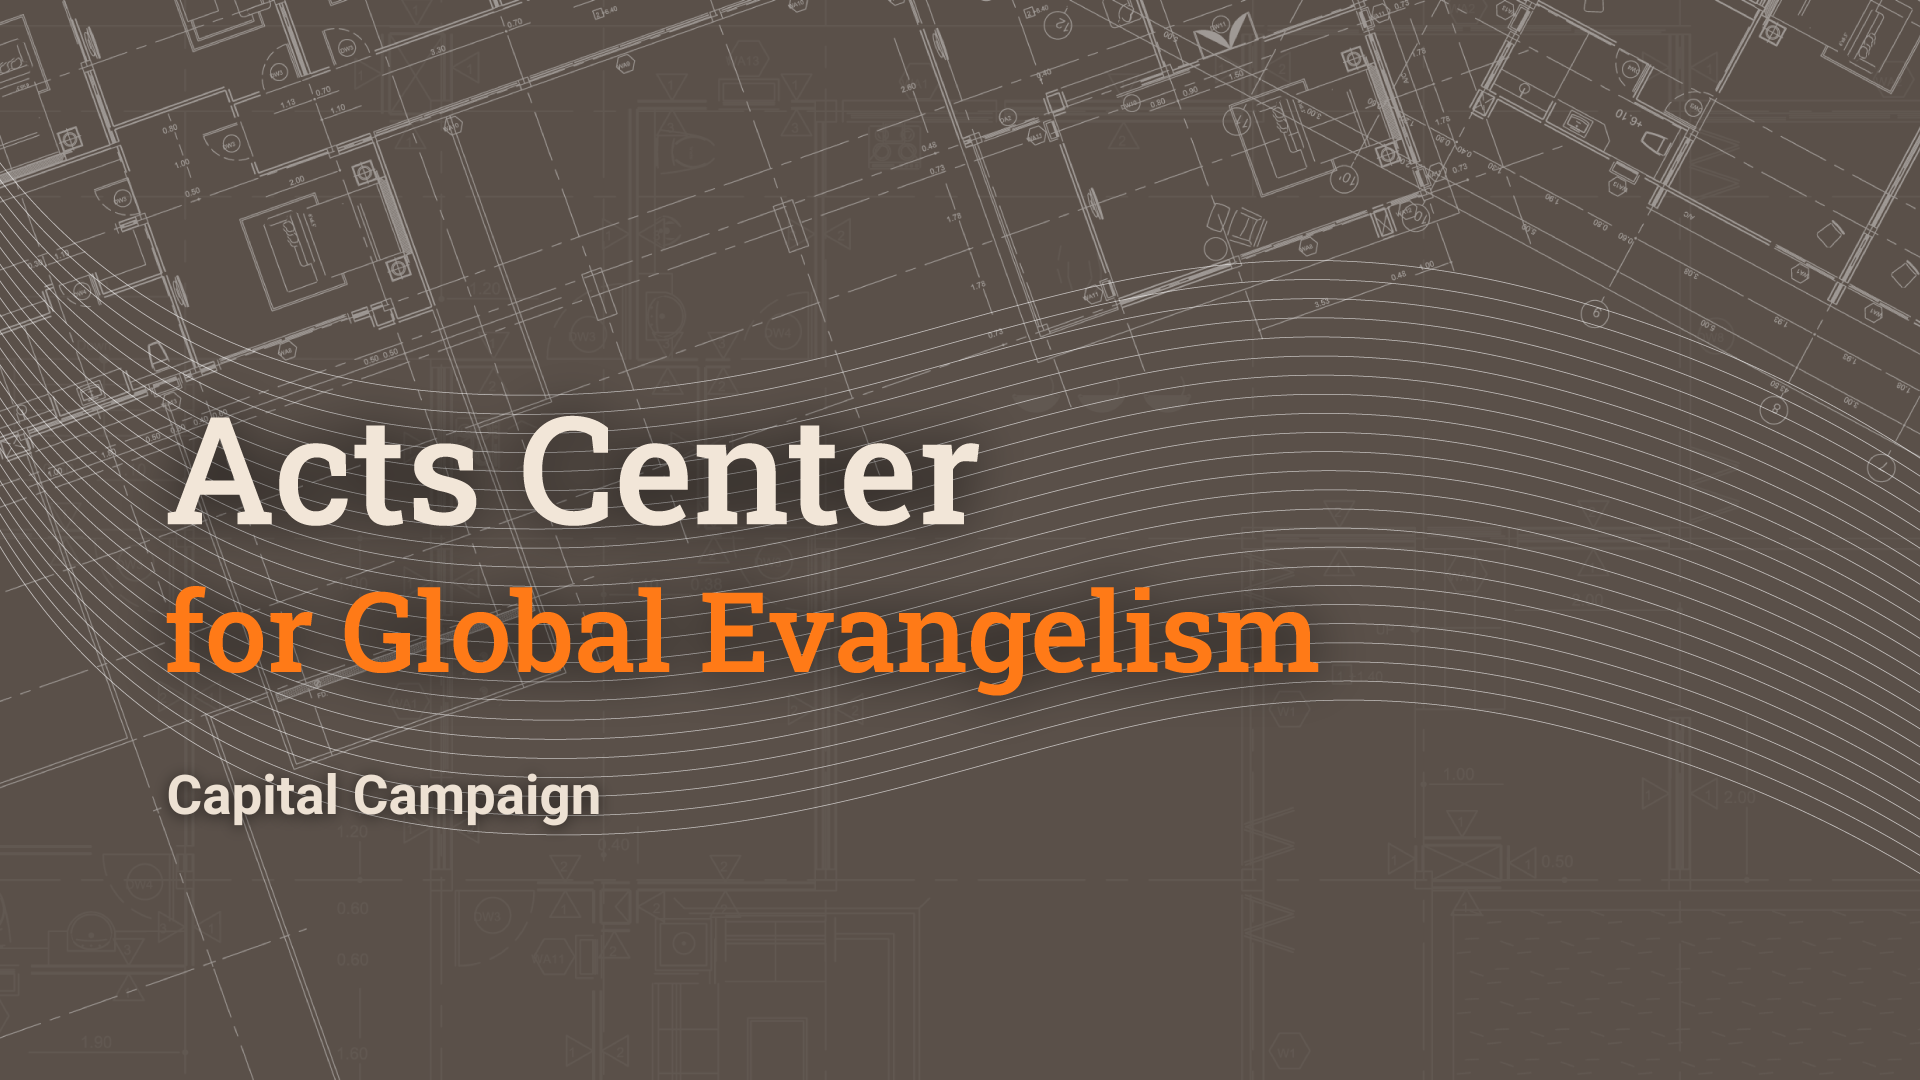 Acts Center for Global Evangelism